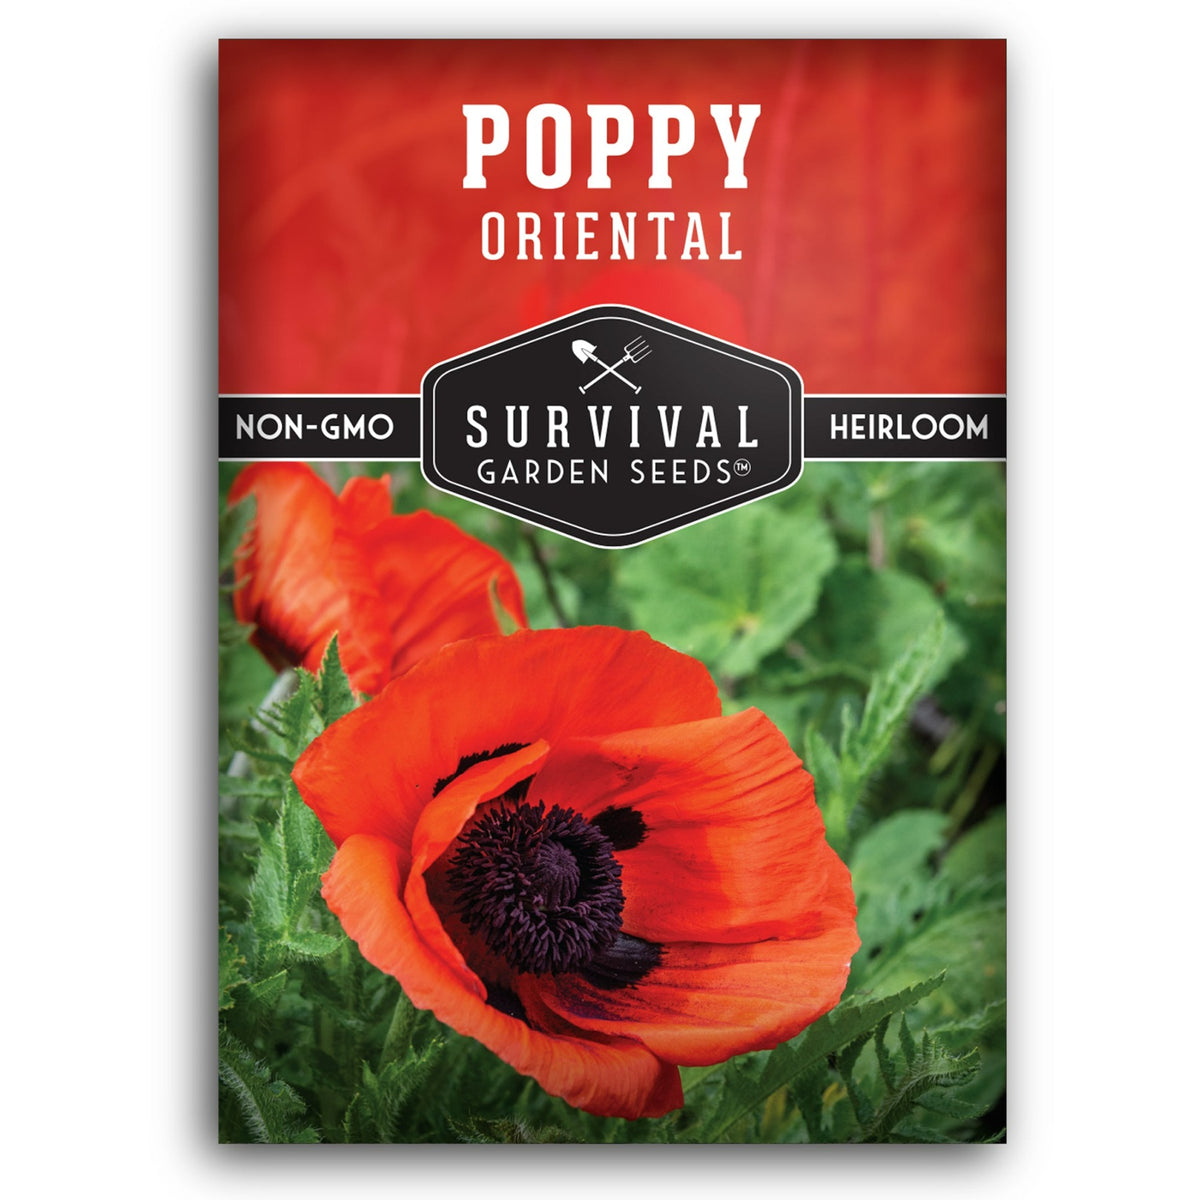 Oriental Poppy seeds for planting